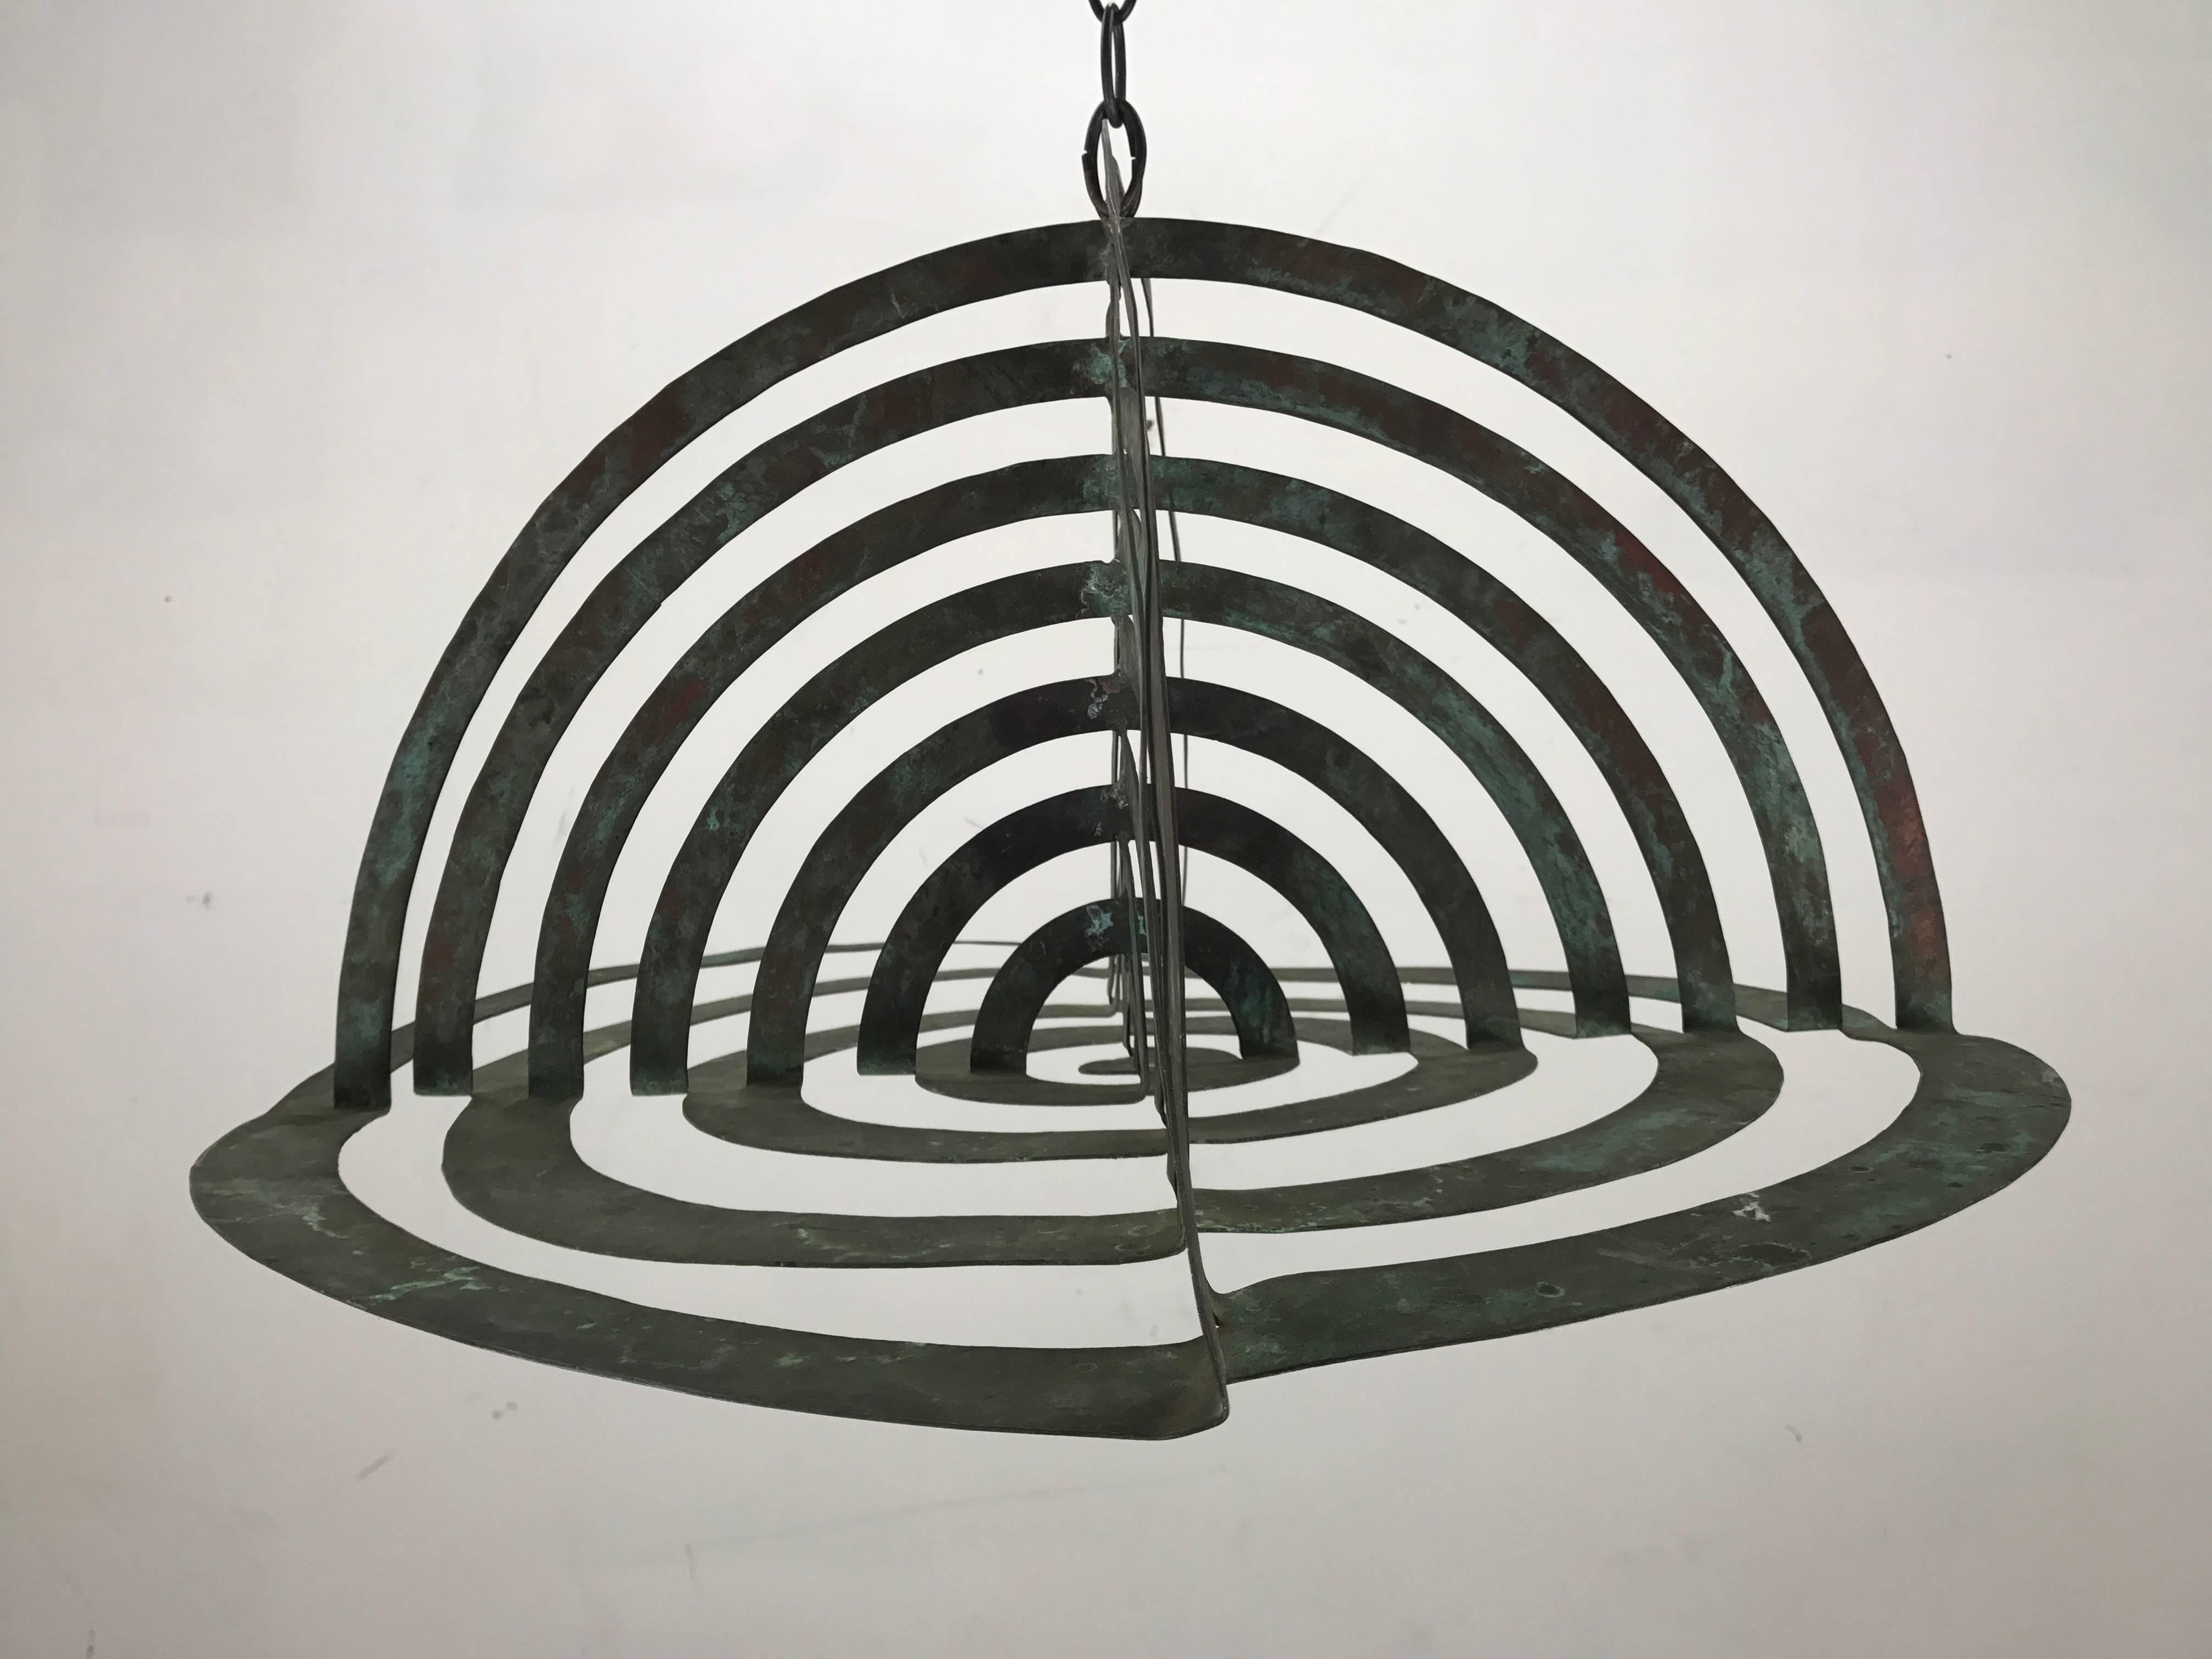 Modernist copper sculpture, indoor or outdoor. Can be hung or placed as stationary element, amazing design made with one continuous copper strip.